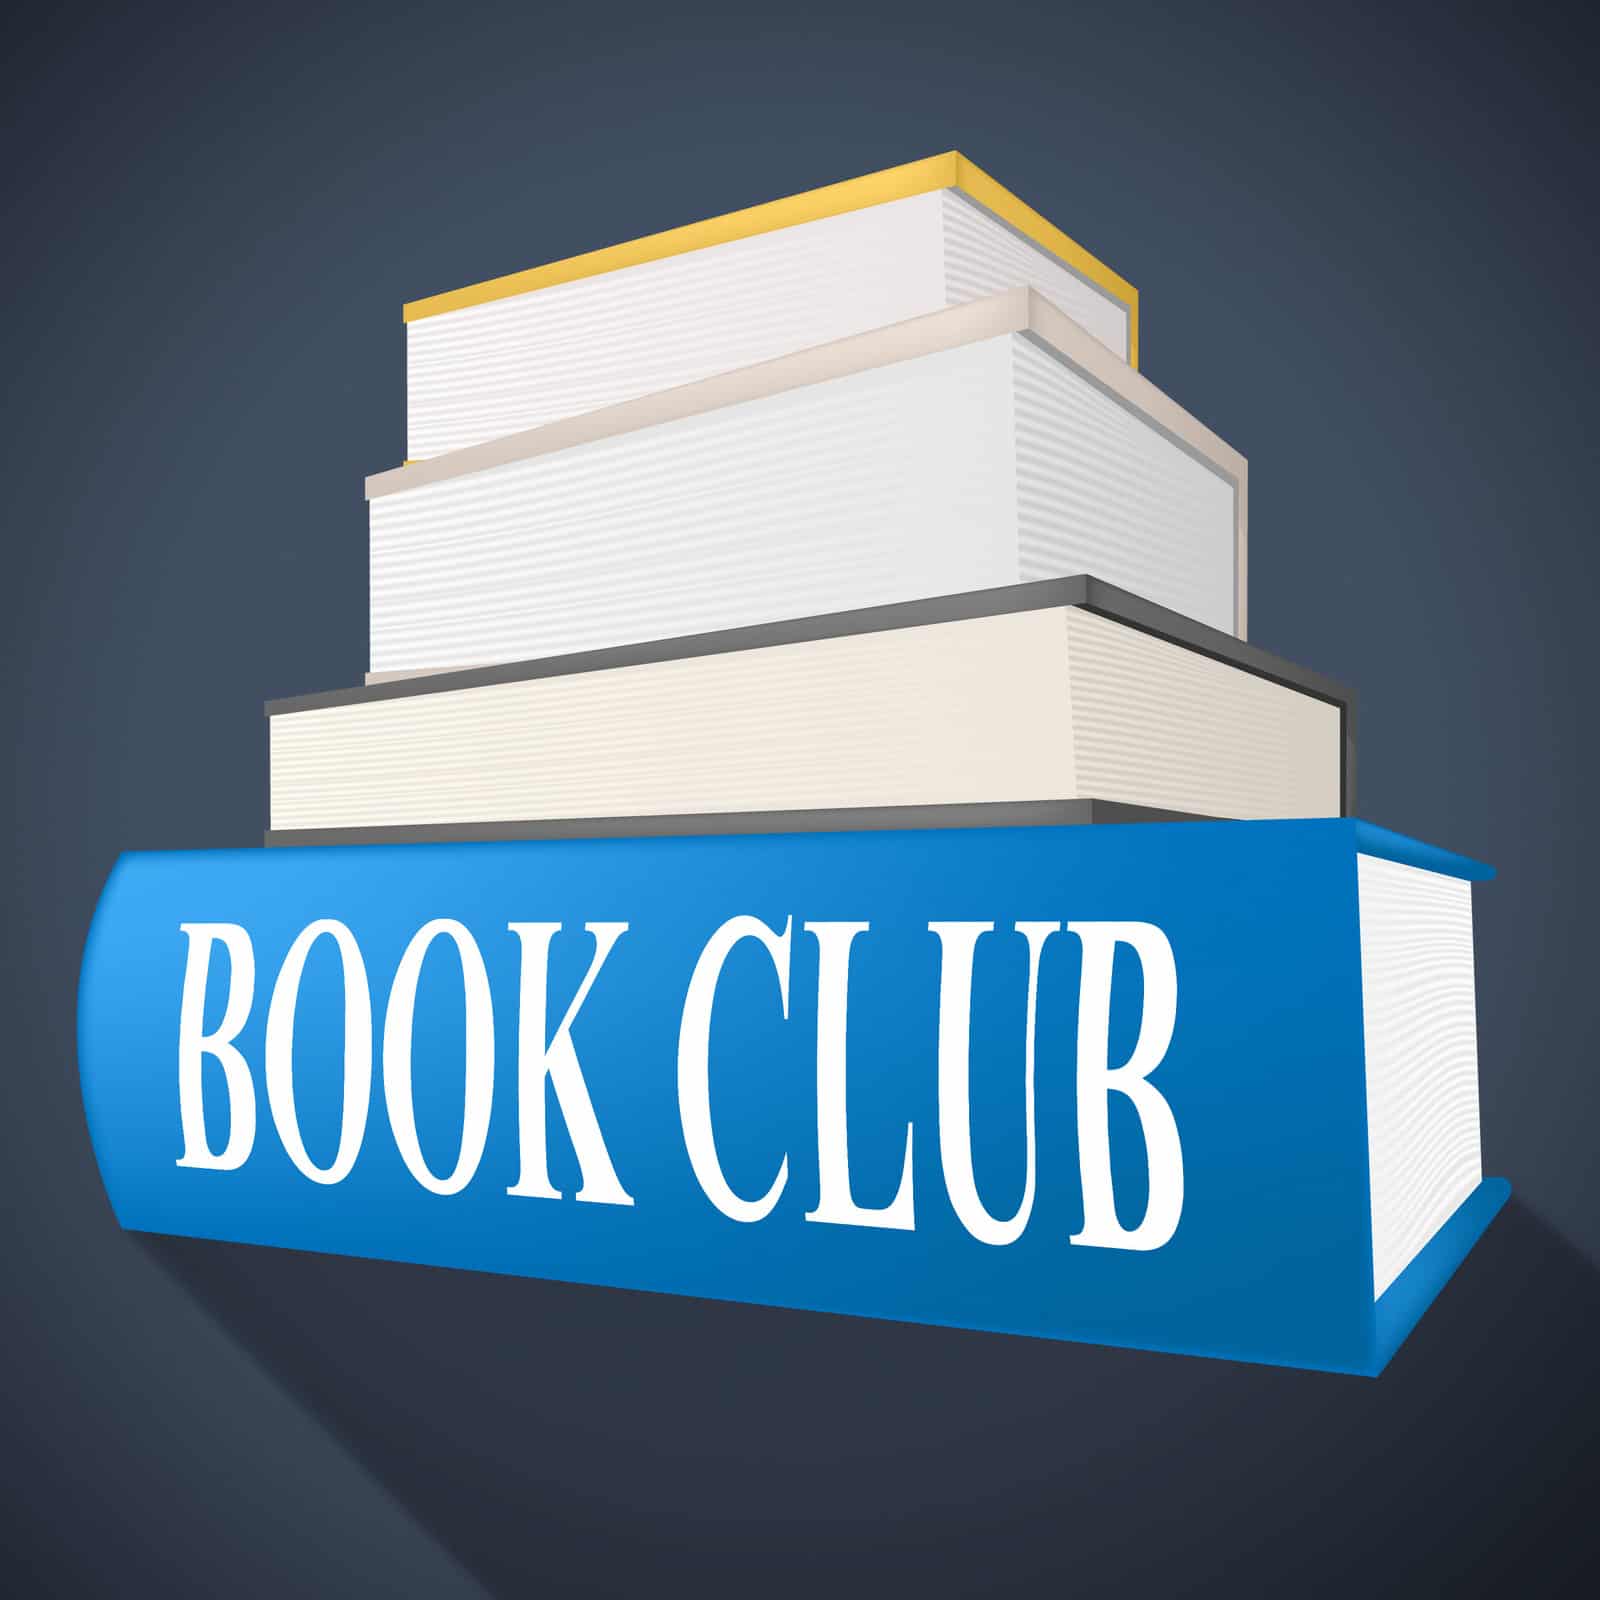 How to start a book club